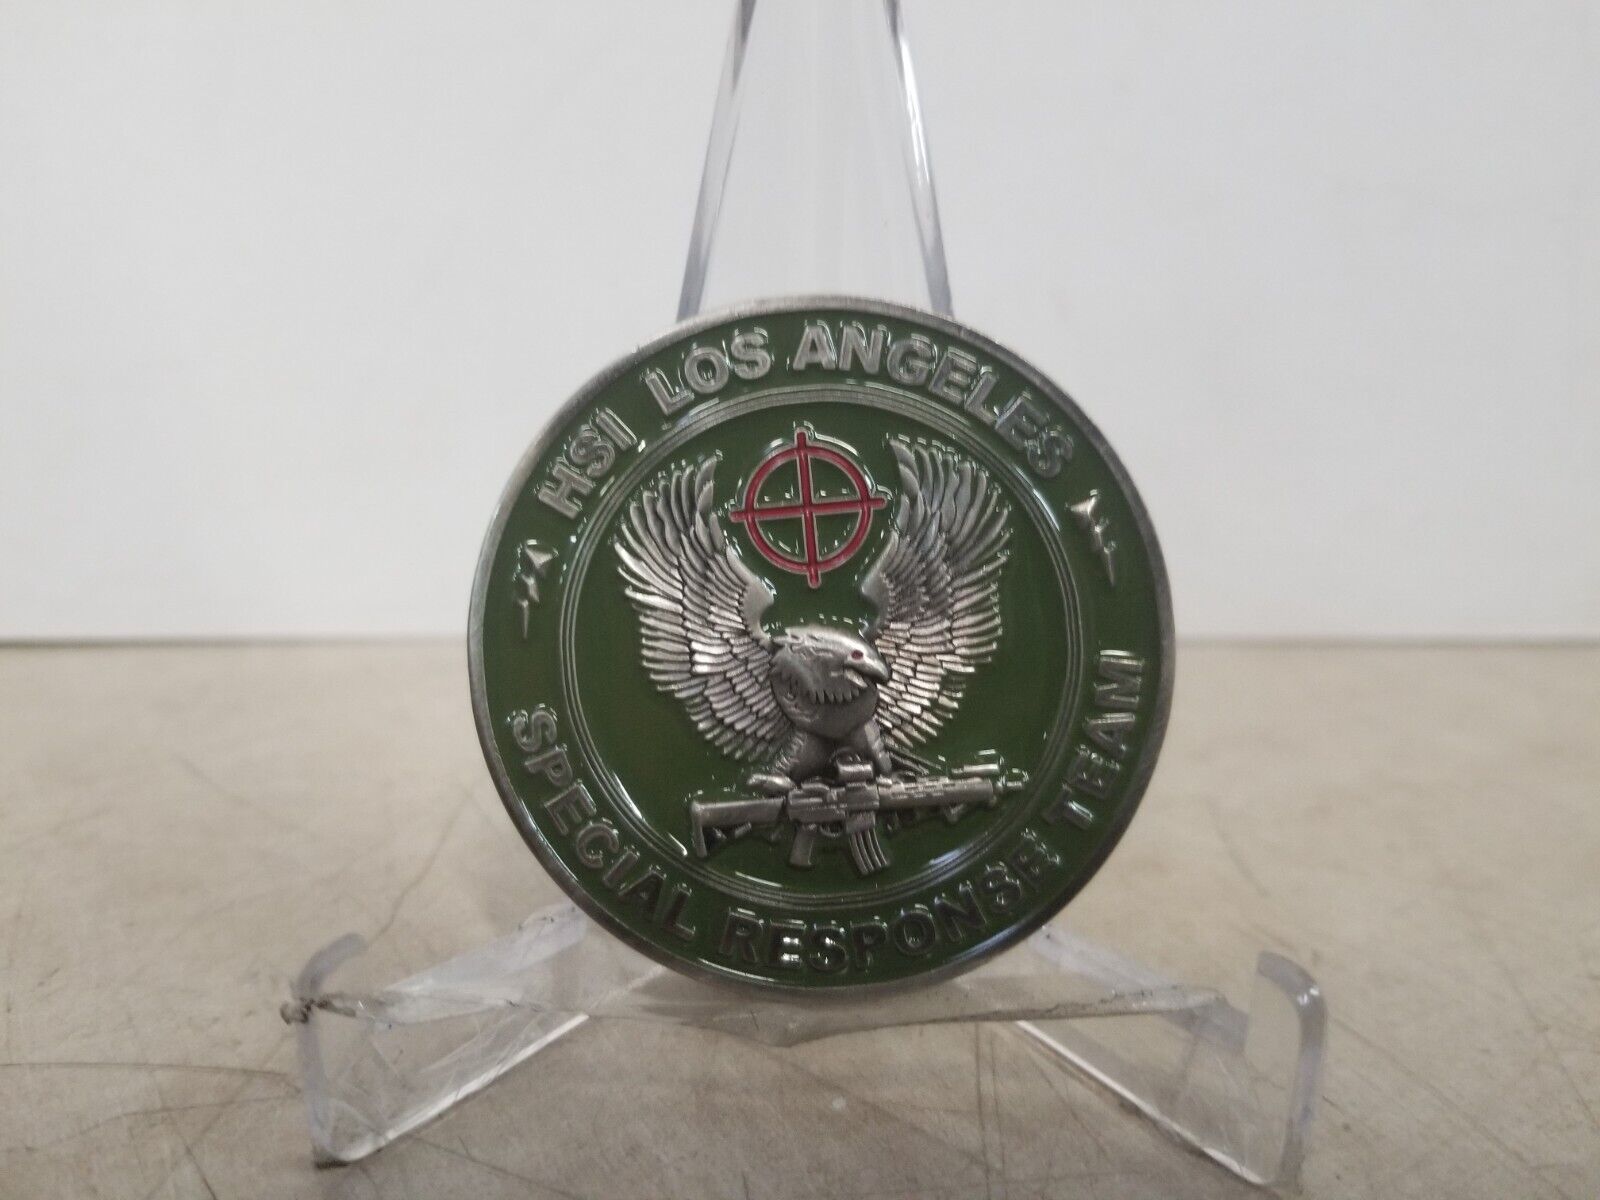 HSI Los Angeles Special Response Team Challenge Coin 